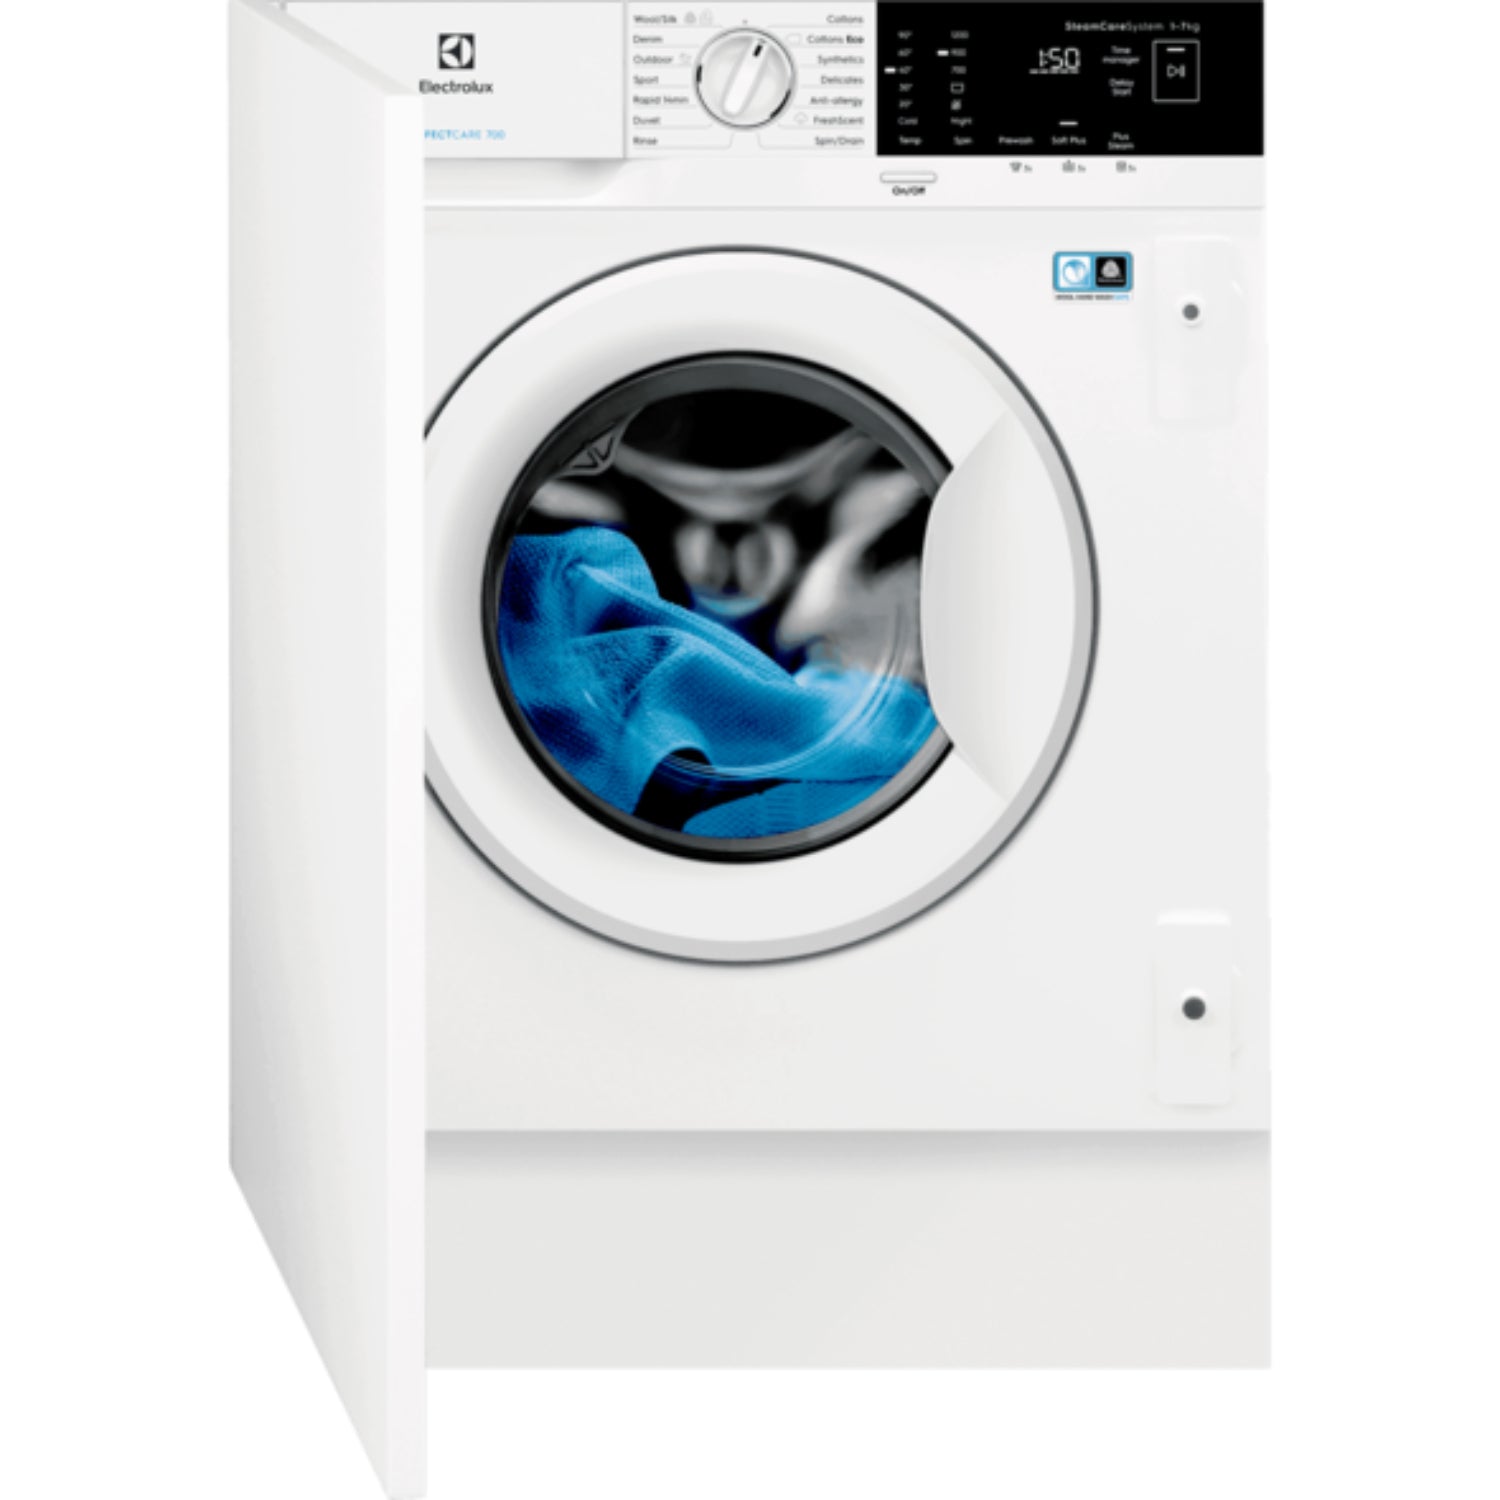 Electrolux 7Kg Front Load Washing Machine, 1200 Rpm with Steam Care and Auto Sensor, White